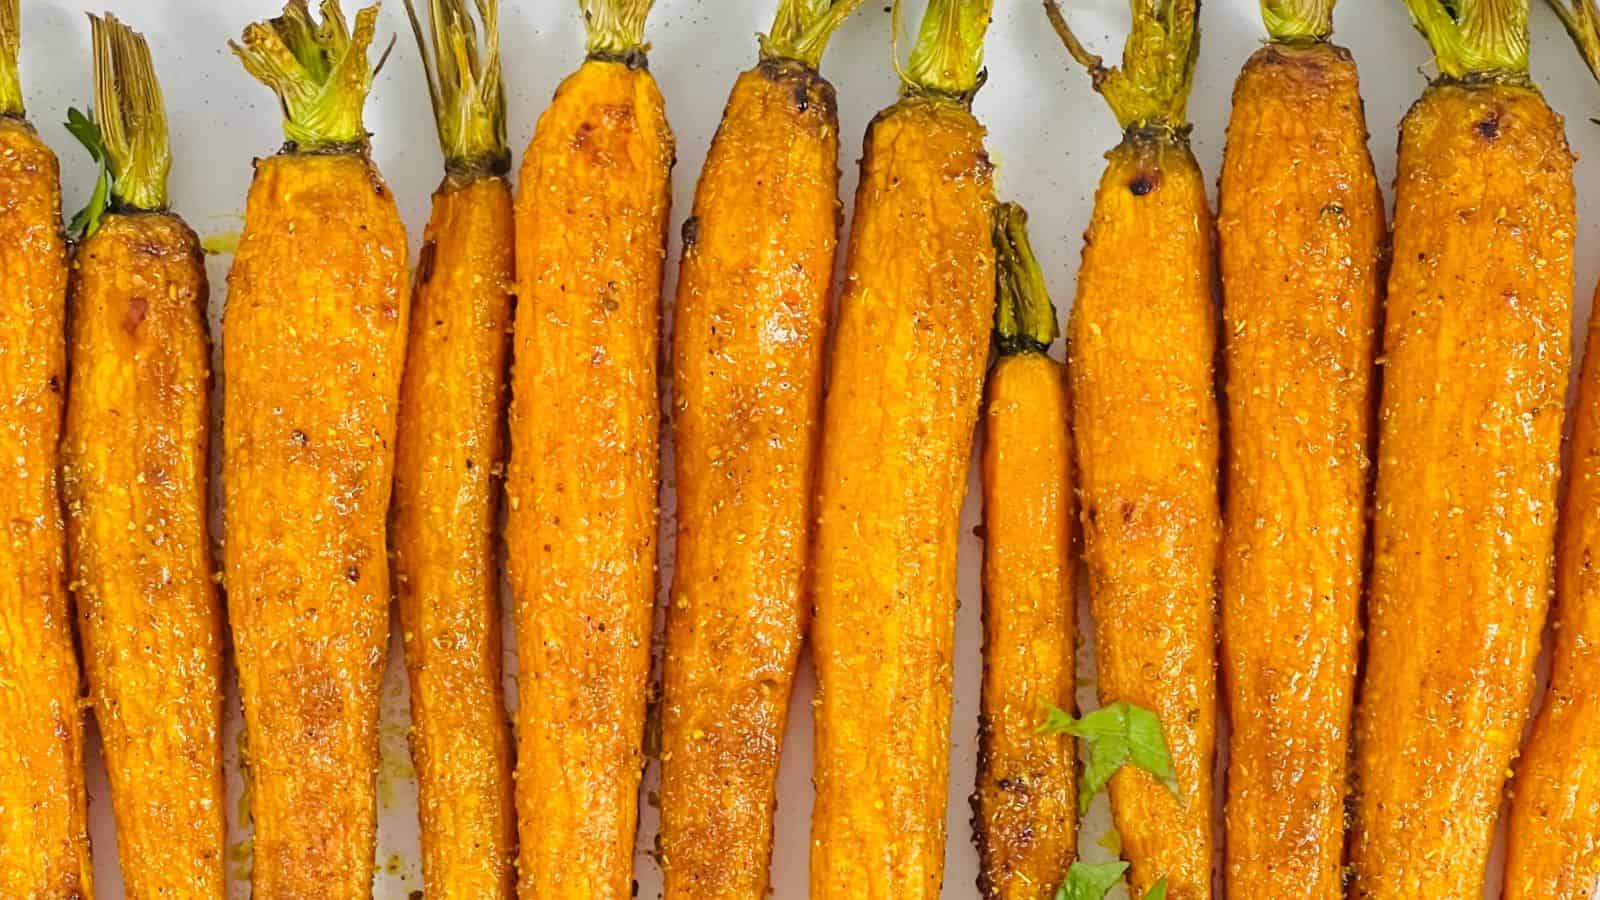 Curried Roasted Carrots with seasoning, lined up neatly on a white surface.